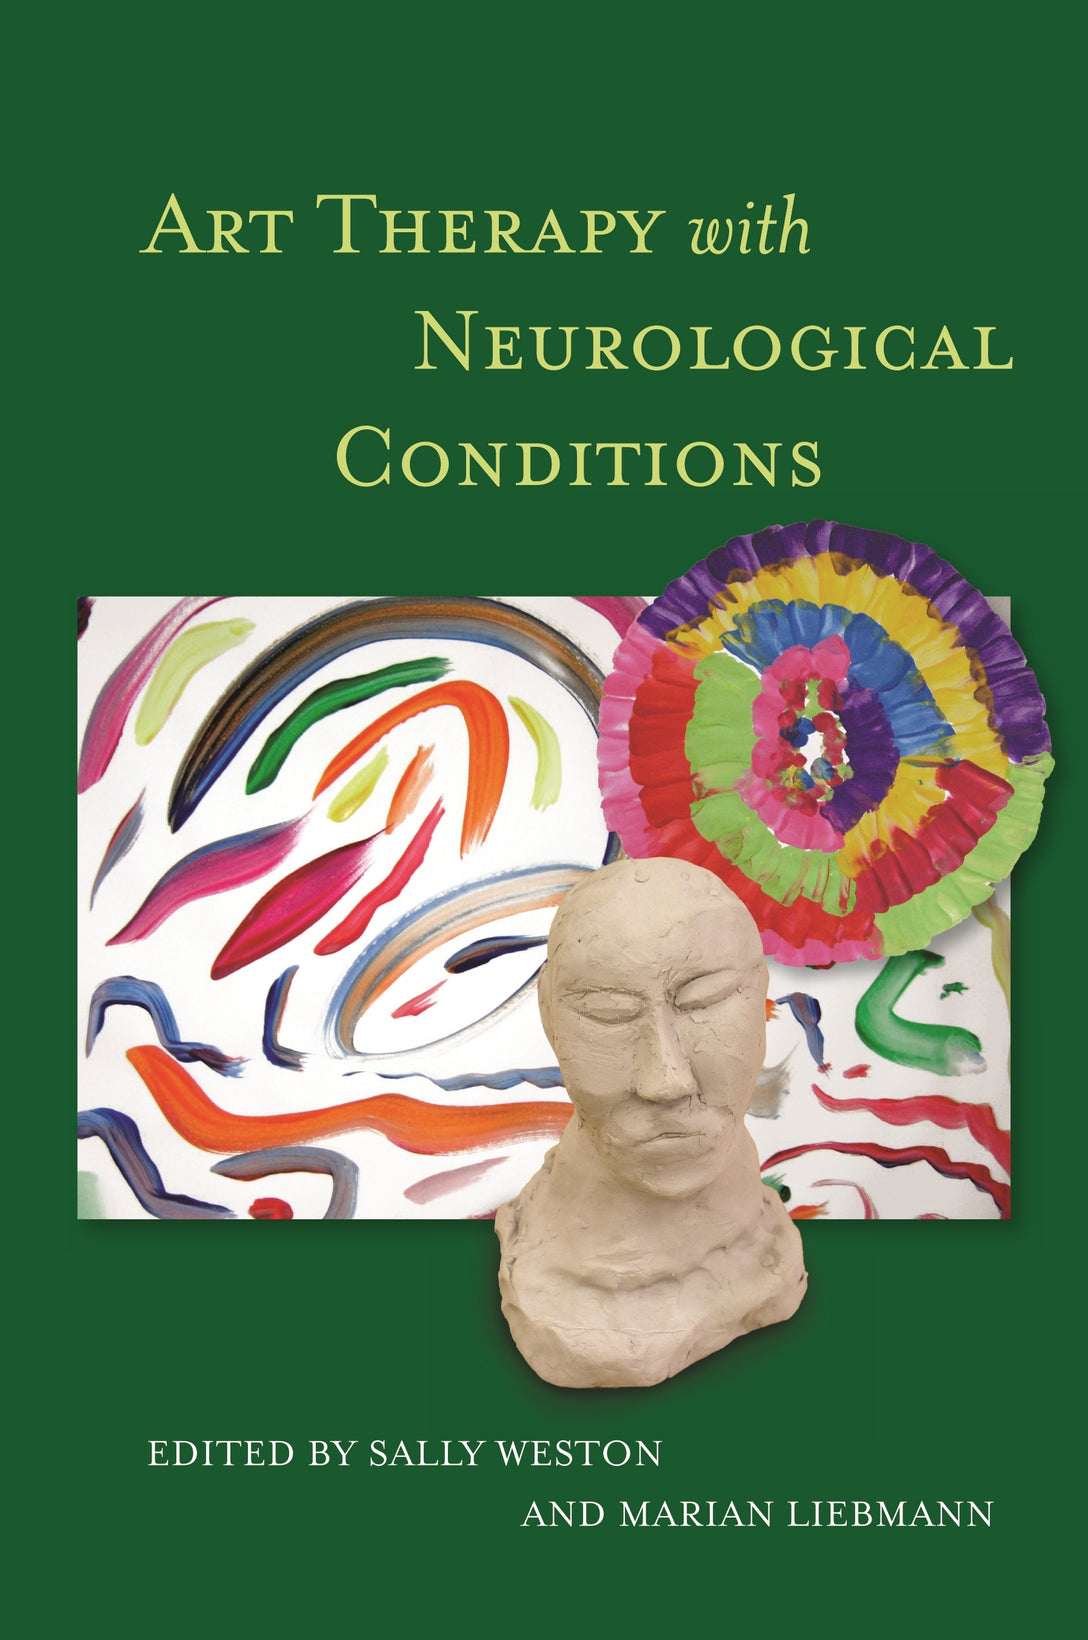 Art Therapy with Neurological Conditions by Sally Weston, Marian Liebmann, Jackie Ashley, No Author Listed